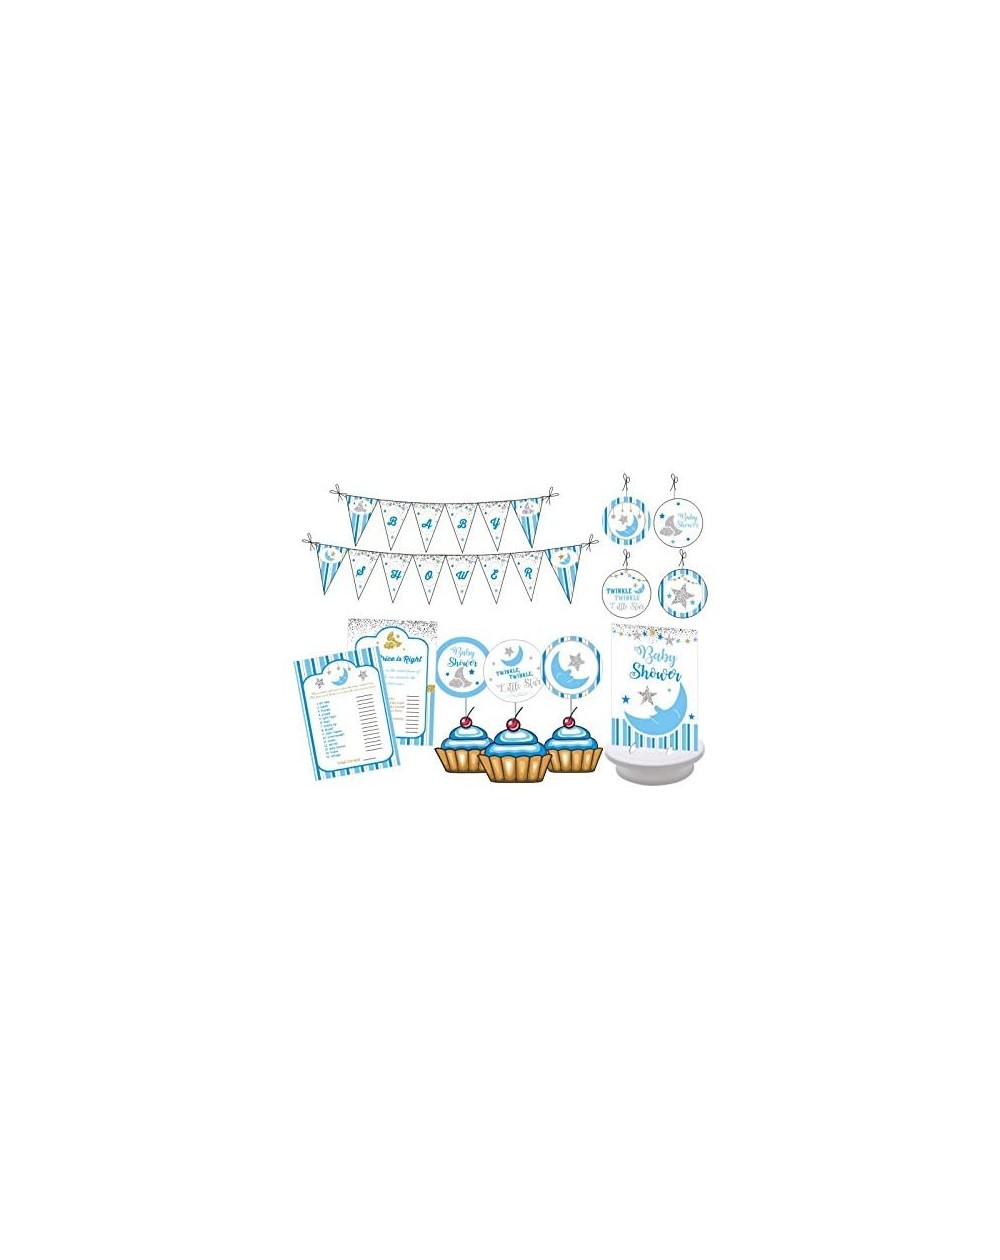 Party Packs Twinkle Little Star Shower Party. Boy Baby Shower Party Decorations. It's a Boy. Includes Party Games- Centerpiec...